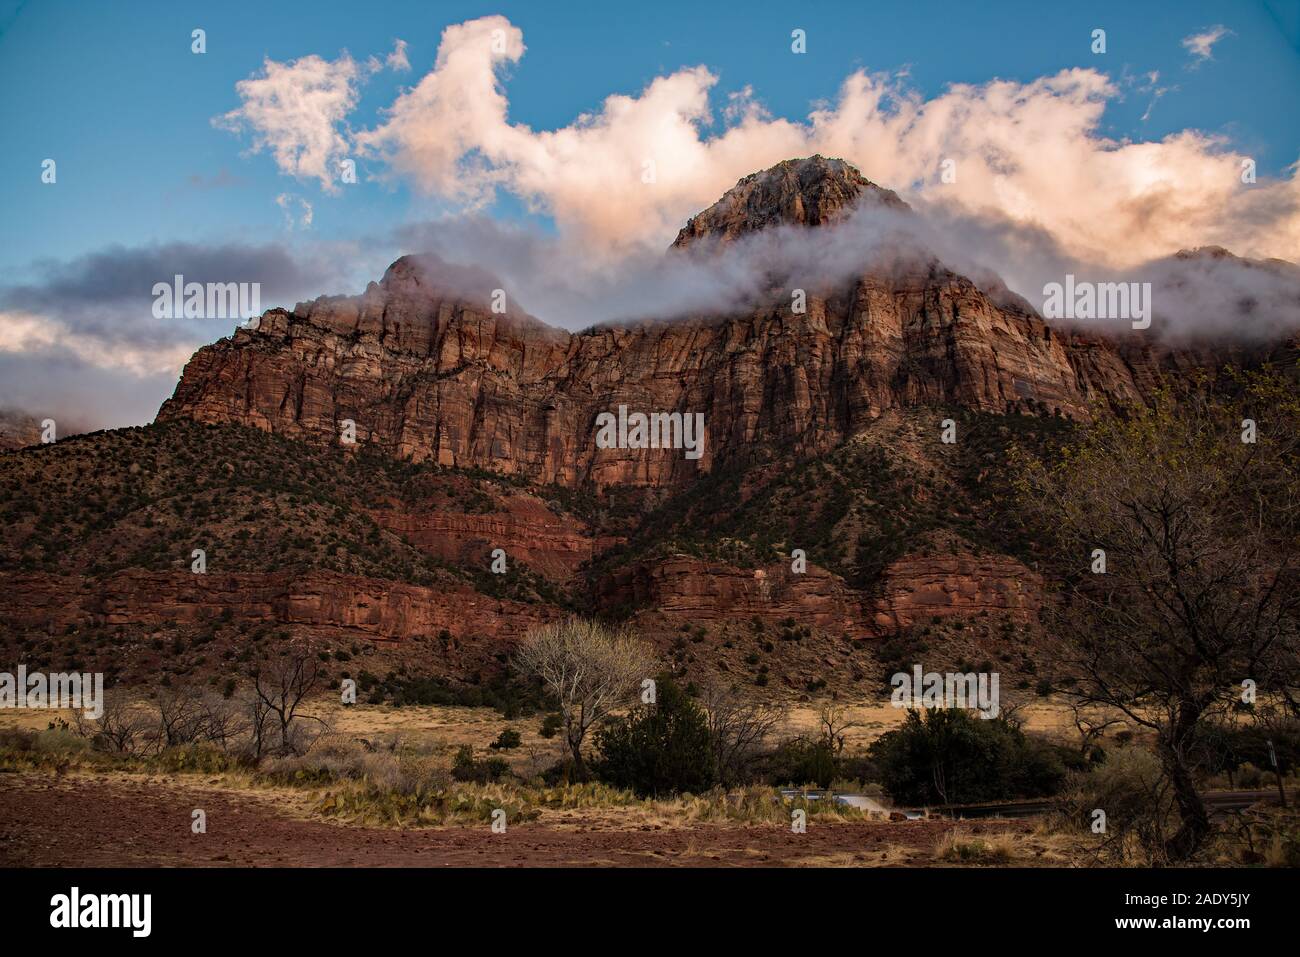 Zions National Park in winter.  Zions Park provides endless vistas and scenic views.  The dramatic mood of the canyon changes with each season. Stock Photo